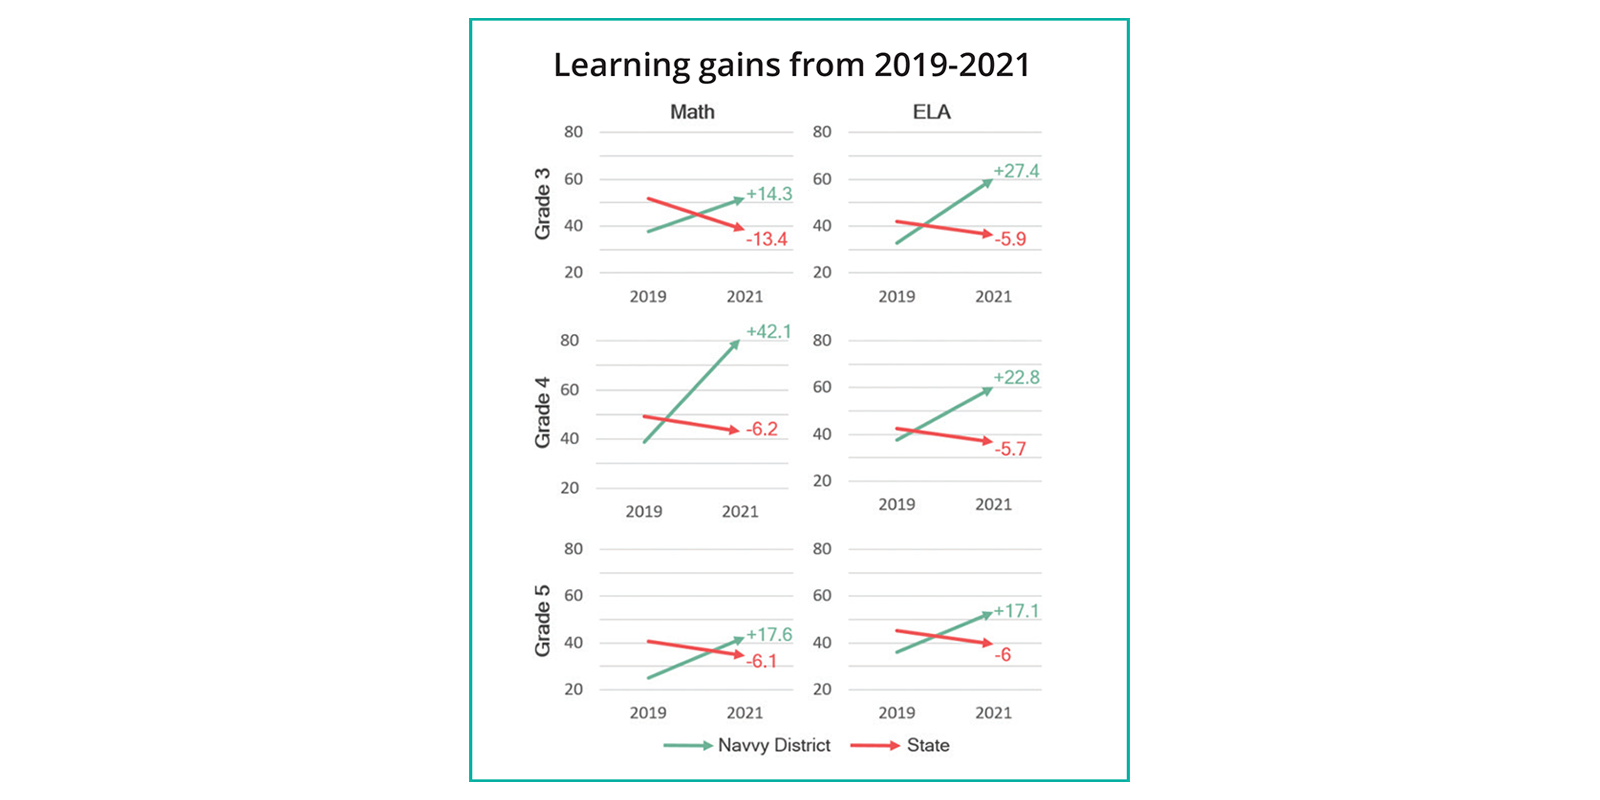 For 2019-2021 Navvy Districts' G3, G4, & G5 increased learning grains for Math and ELA while State significantly decreased.